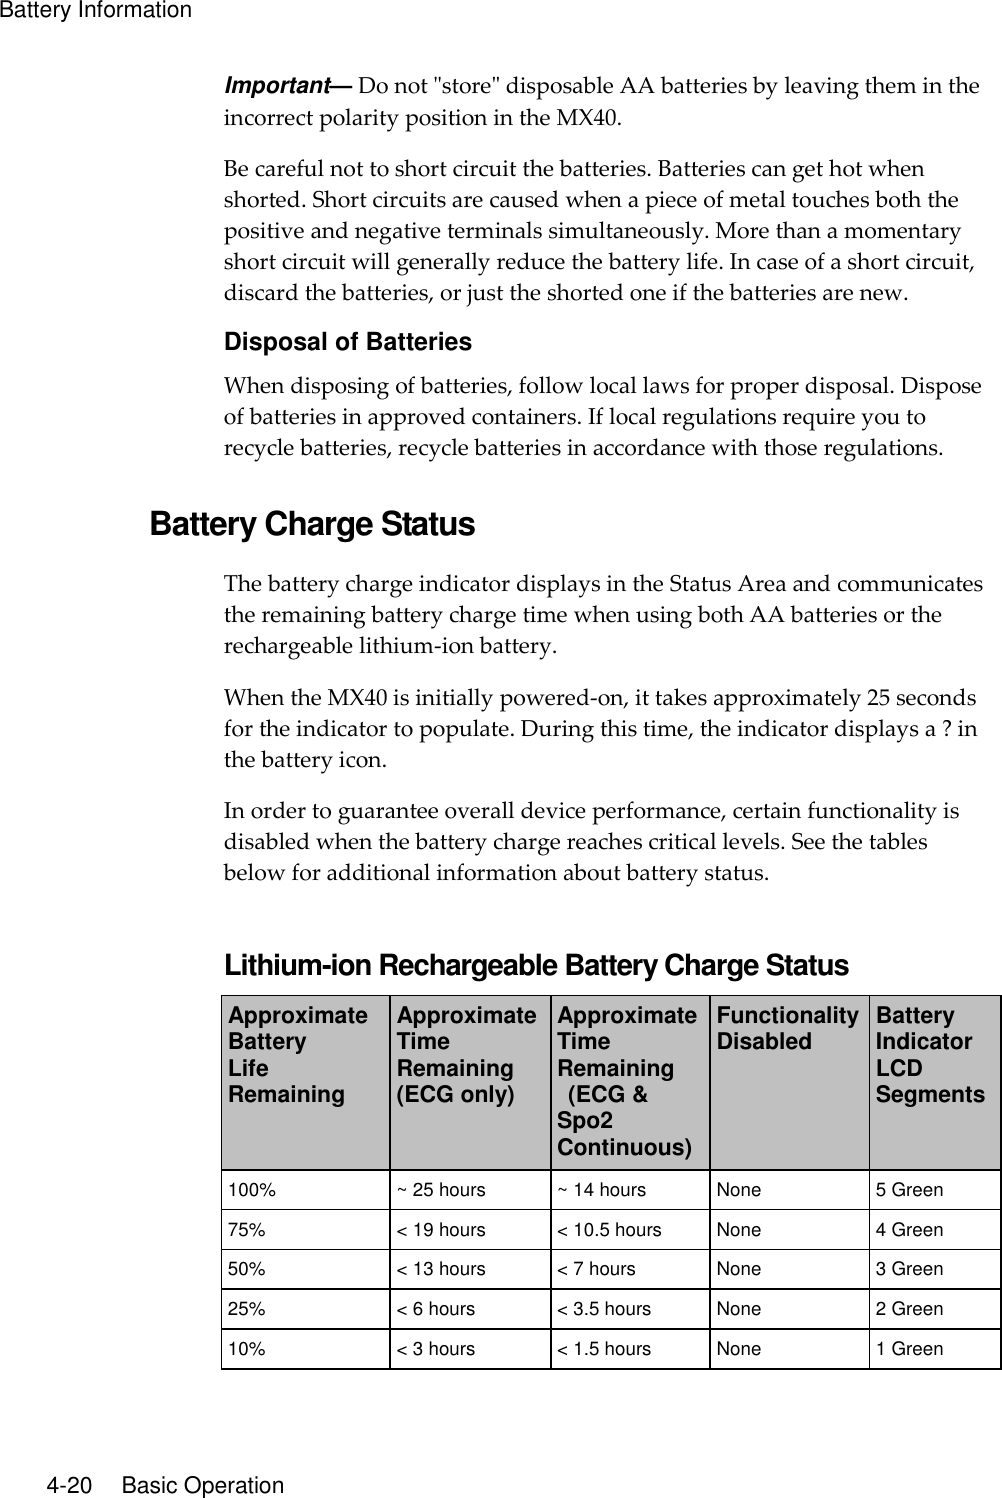 Battery Information   4-20    Basic Operation Important— Do not &quot;store&quot; disposable AA batteries by leaving them in the incorrect polarity position in the MX40. Be careful not to short circuit the batteries. Batteries can get hot when shorted. Short circuits are caused when a piece of metal touches both the positive and negative terminals simultaneously. More than a momentary short circuit will generally reduce the battery life. In case of a short circuit, discard the batteries, or just the shorted one if the batteries are new. Disposal of Batteries When disposing of batteries, follow local laws for proper disposal. Dispose of batteries in approved containers. If local regulations require you to recycle batteries, recycle batteries in accordance with those regulations.  Battery Charge Status The battery charge indicator displays in the Status Area and communicates the remaining battery charge time when using both AA batteries or the rechargeable lithium-ion battery.   When the MX40 is initially powered-on, it takes approximately 25 seconds for the indicator to populate. During this time, the indicator displays a ? in the battery icon. In order to guarantee overall device performance, certain functionality is disabled when the battery charge reaches critical levels. See the tables below for additional information about battery status.  Lithium-ion Rechargeable Battery Charge Status Approximate Battery Life Remaining Approximate Time Remaining (ECG only) Approximate Time Remaining   (ECG &amp; Spo2 Continuous) Functionality Disabled Battery Indicator LCD Segments 100% ~ 25 hours ~ 14 hours None 5 Green 75% &lt; 19 hours &lt; 10.5 hours None 4 Green 50% &lt; 13 hours &lt; 7 hours None 3 Green 25% &lt; 6 hours &lt; 3.5 hours None 2 Green 10% &lt; 3 hours &lt; 1.5 hours None 1 Green 